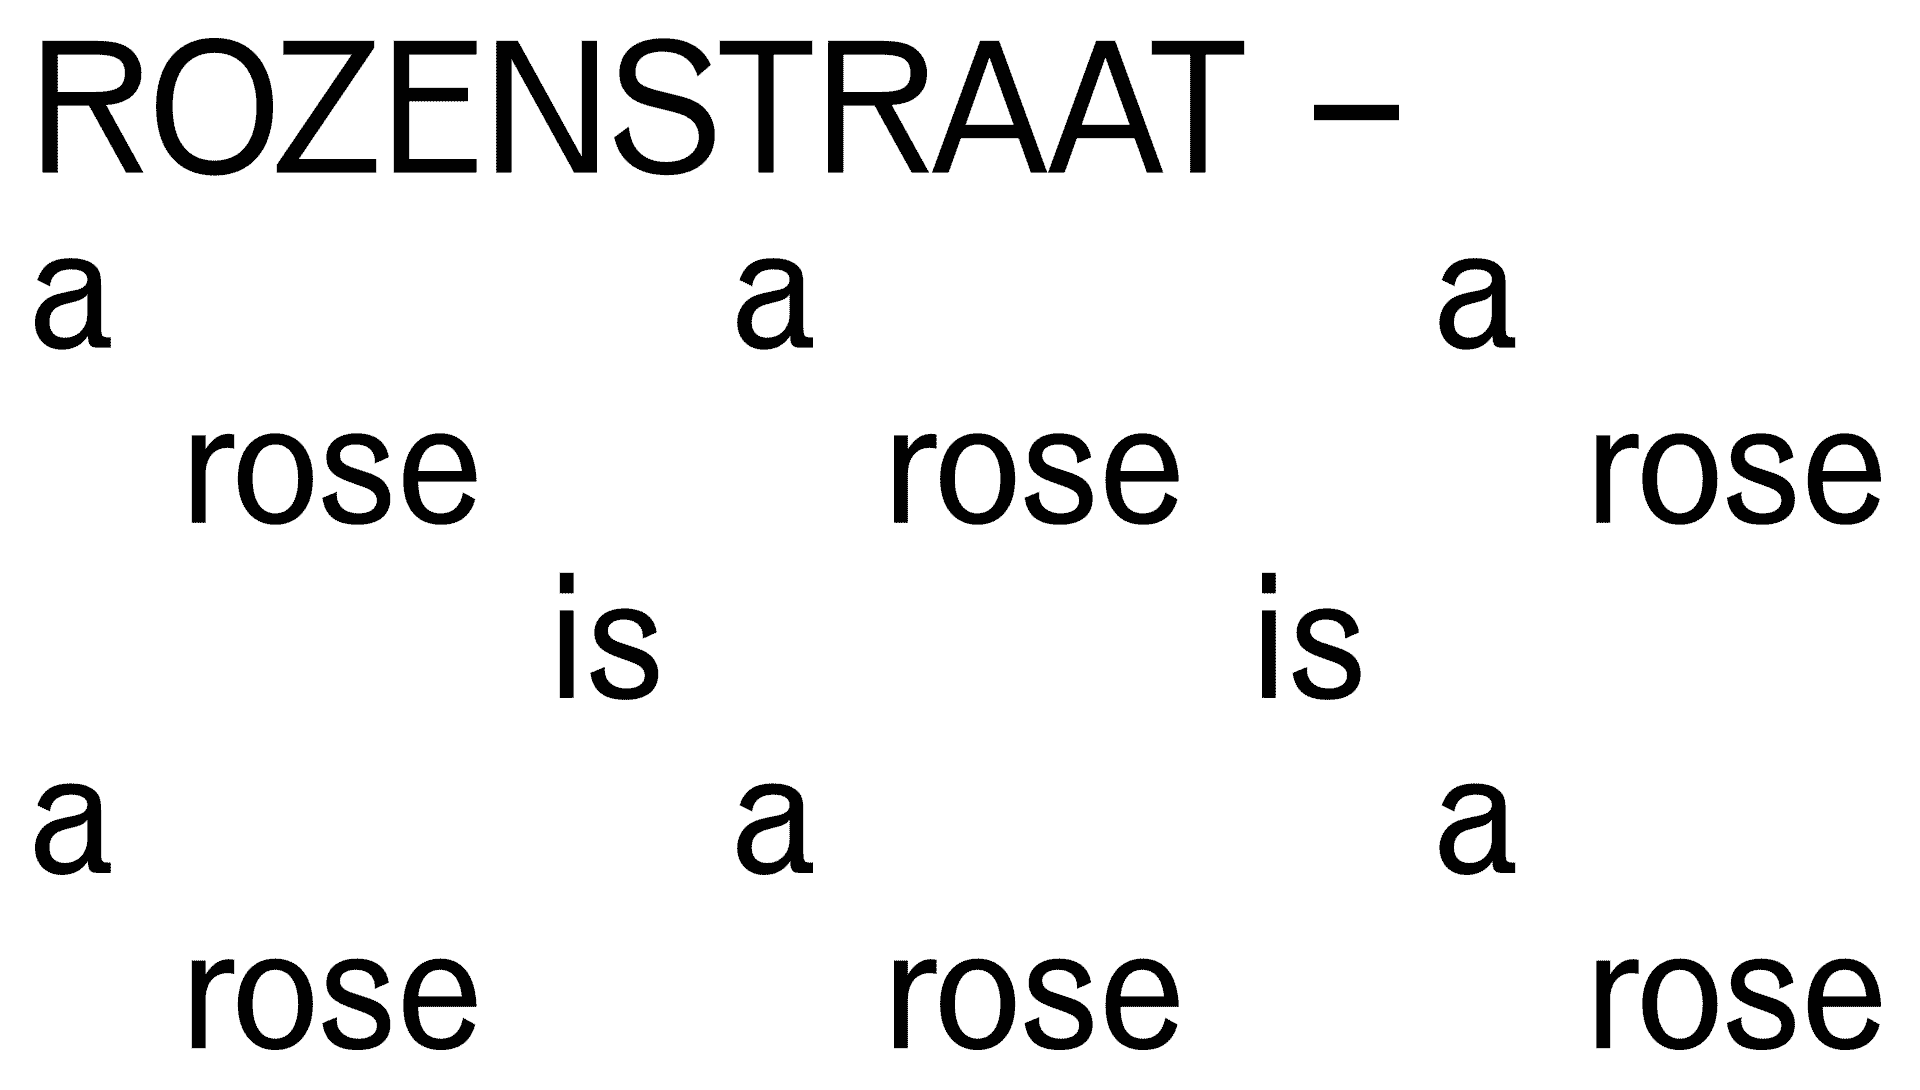 ROZENSTRAAT – A rose is a rose is a rose